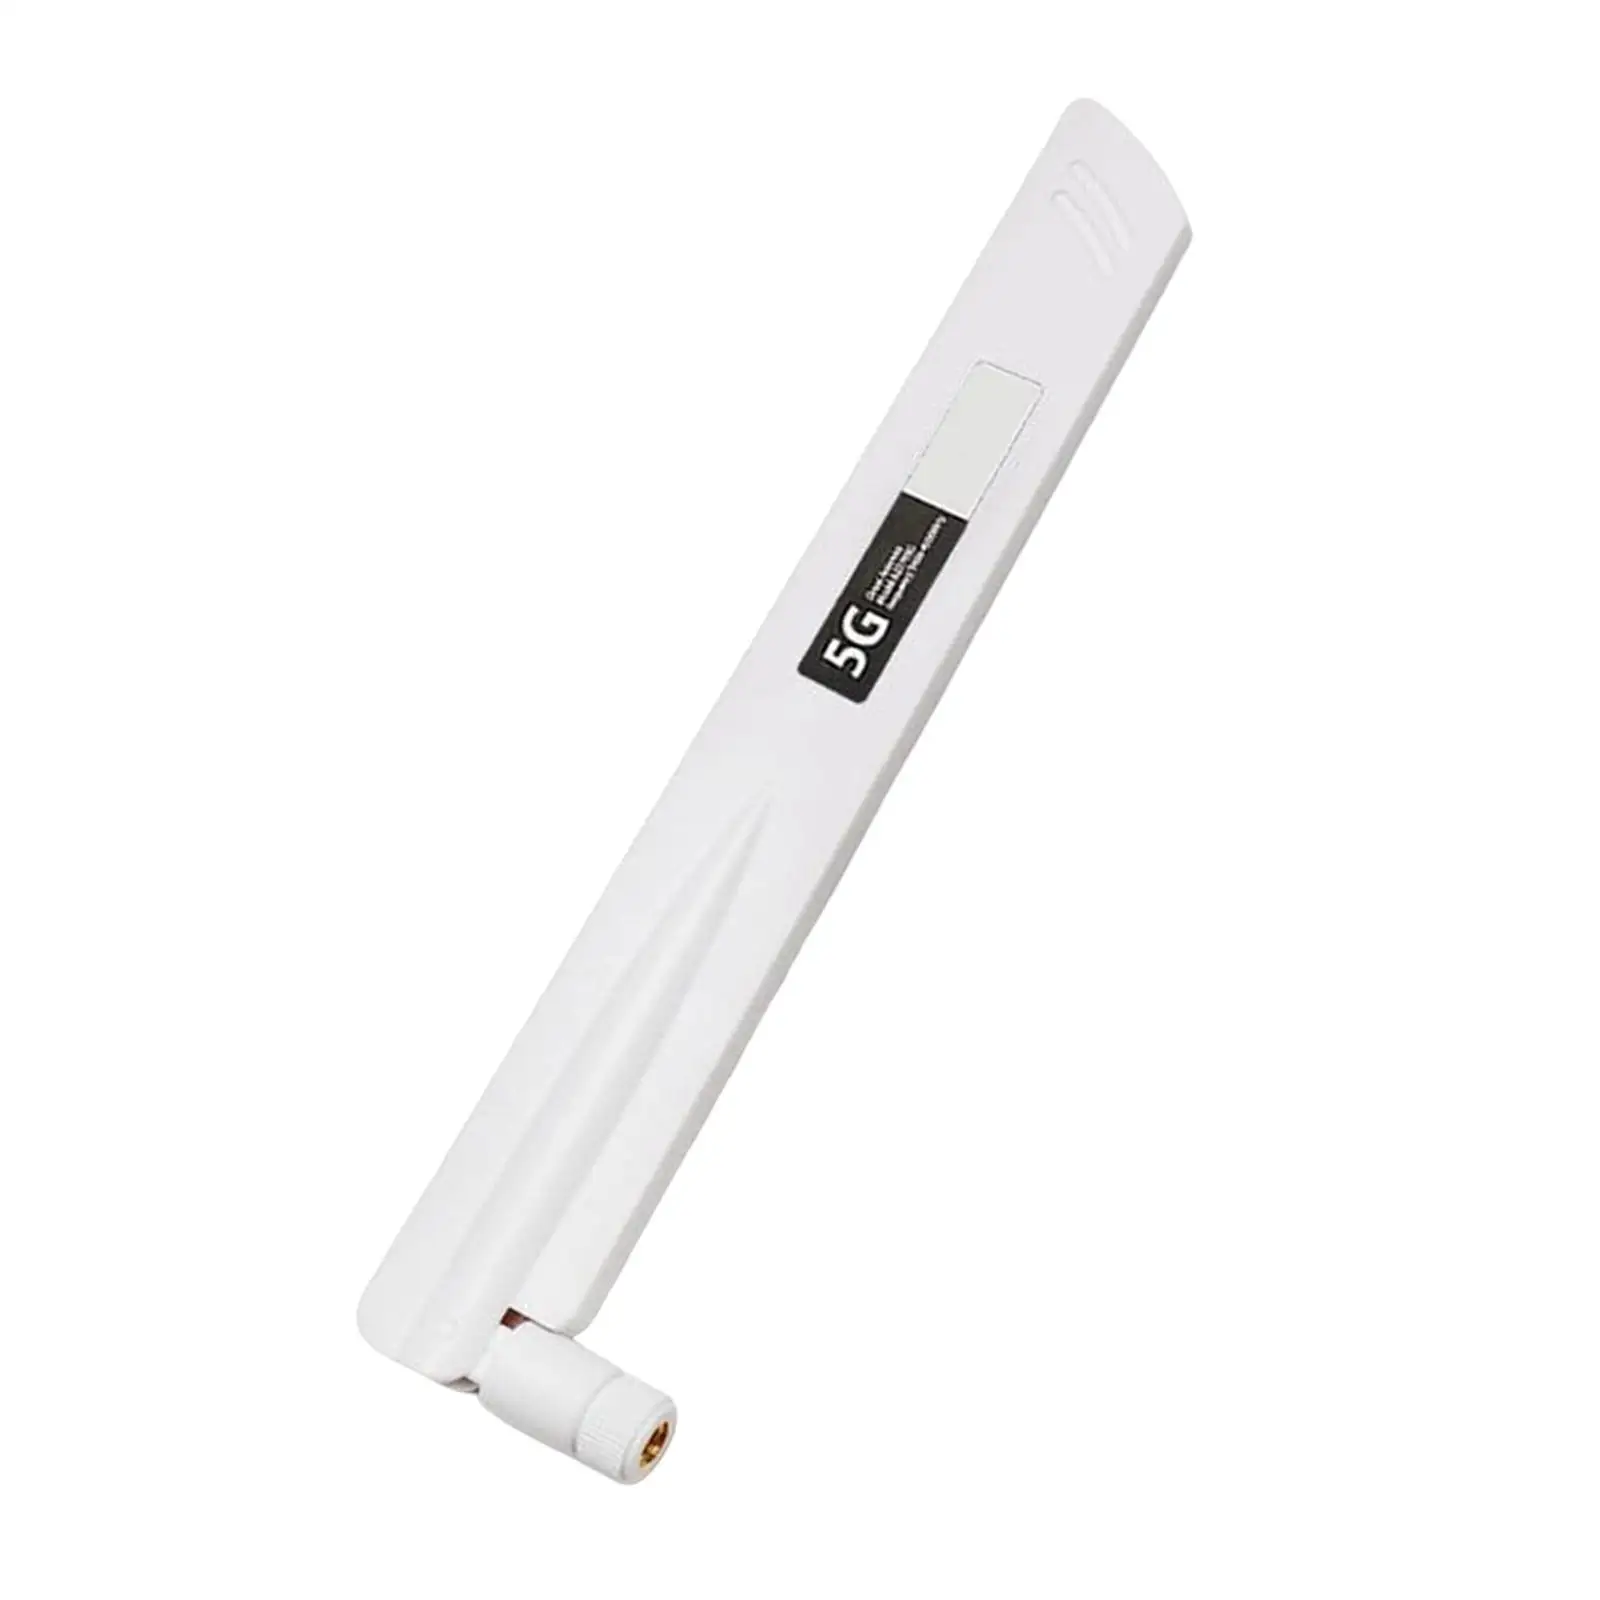 3G 4G 5G LTE Antenna 18dBi Universal 600MHz-6000MHz Foldable for Router Wireless Network